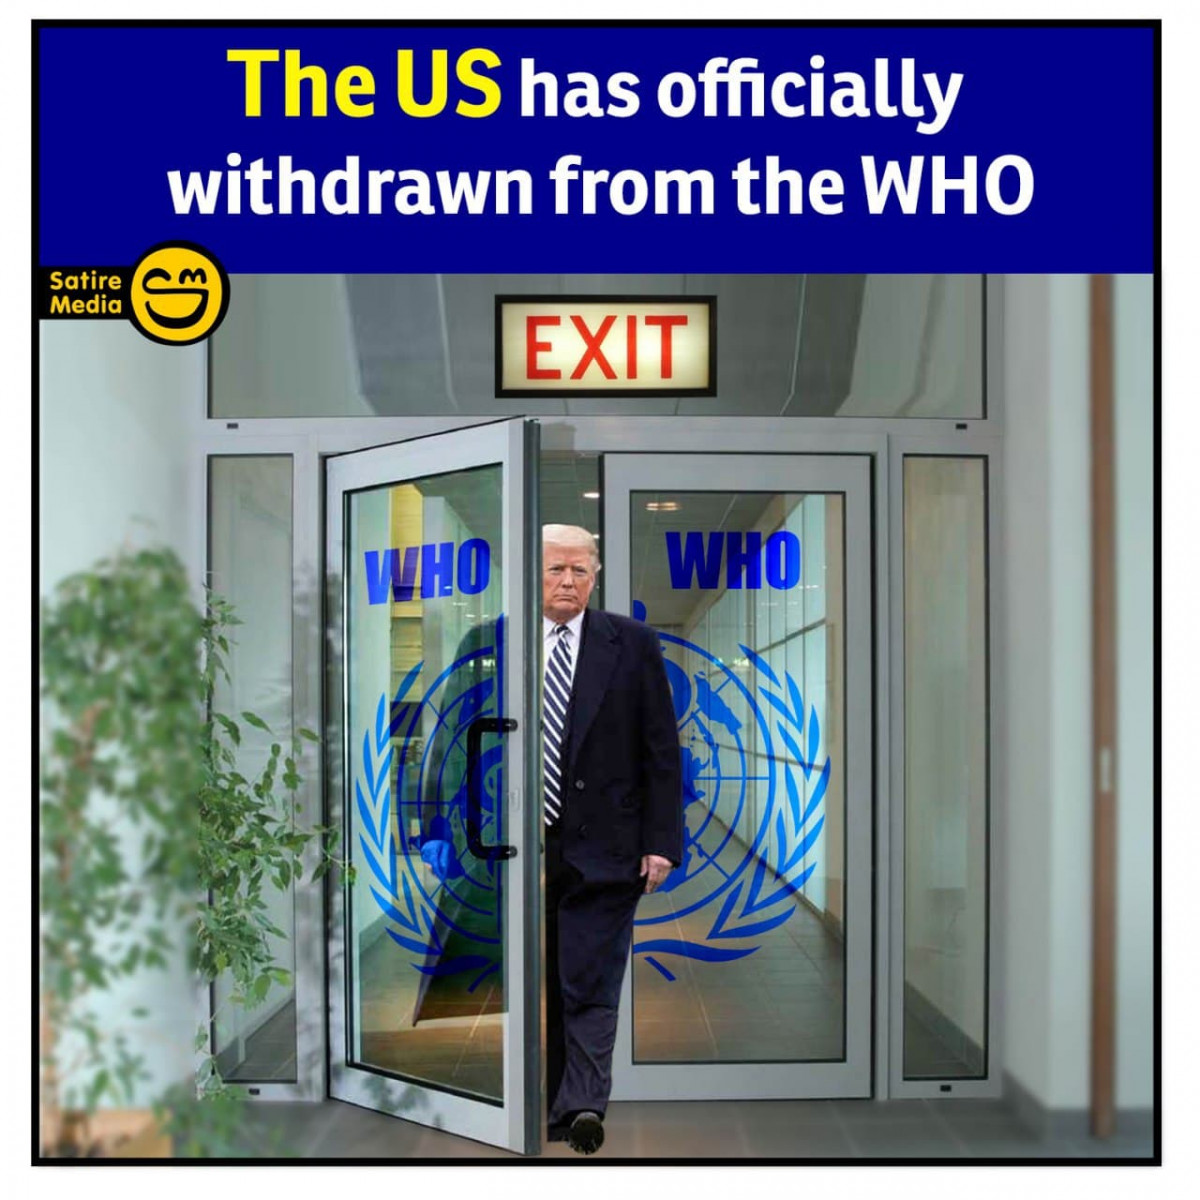 The US has officially withdrawn from the WHO